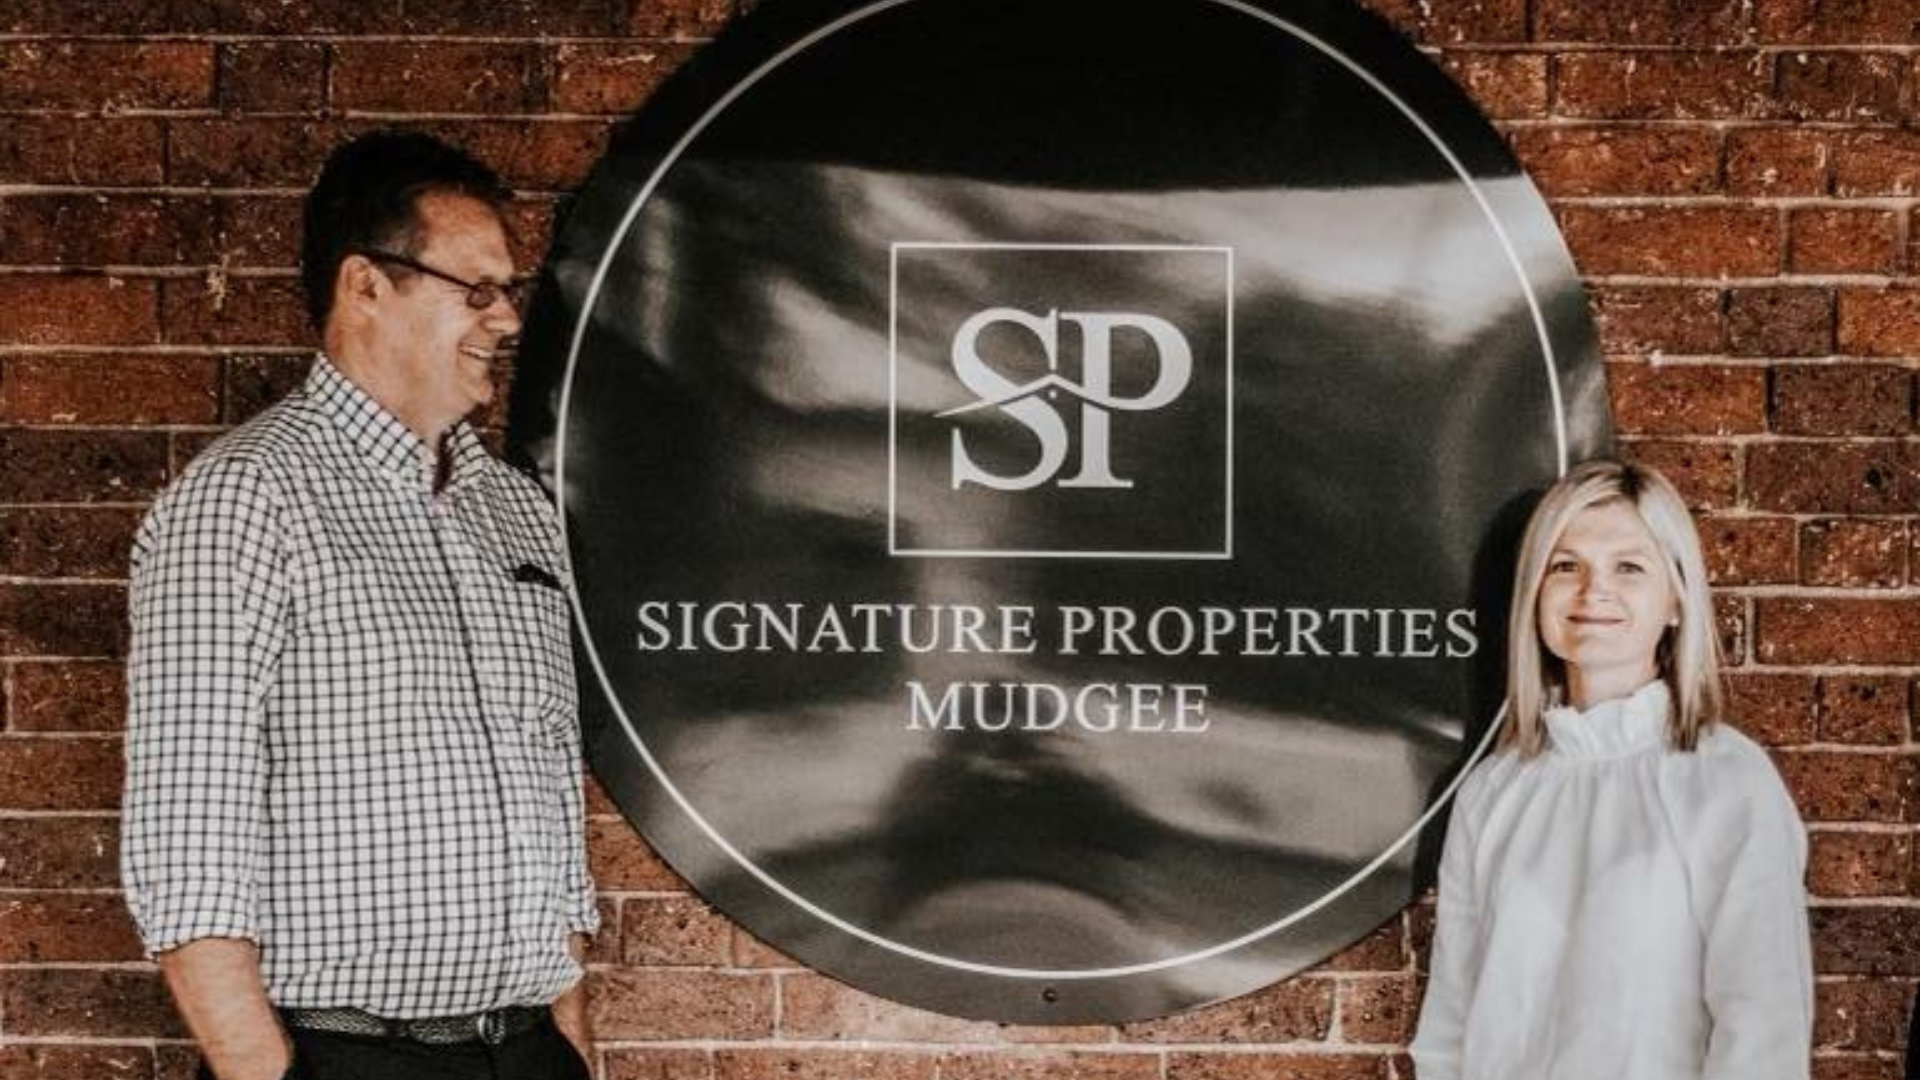 It's who we are: Signature Properties Mudgee